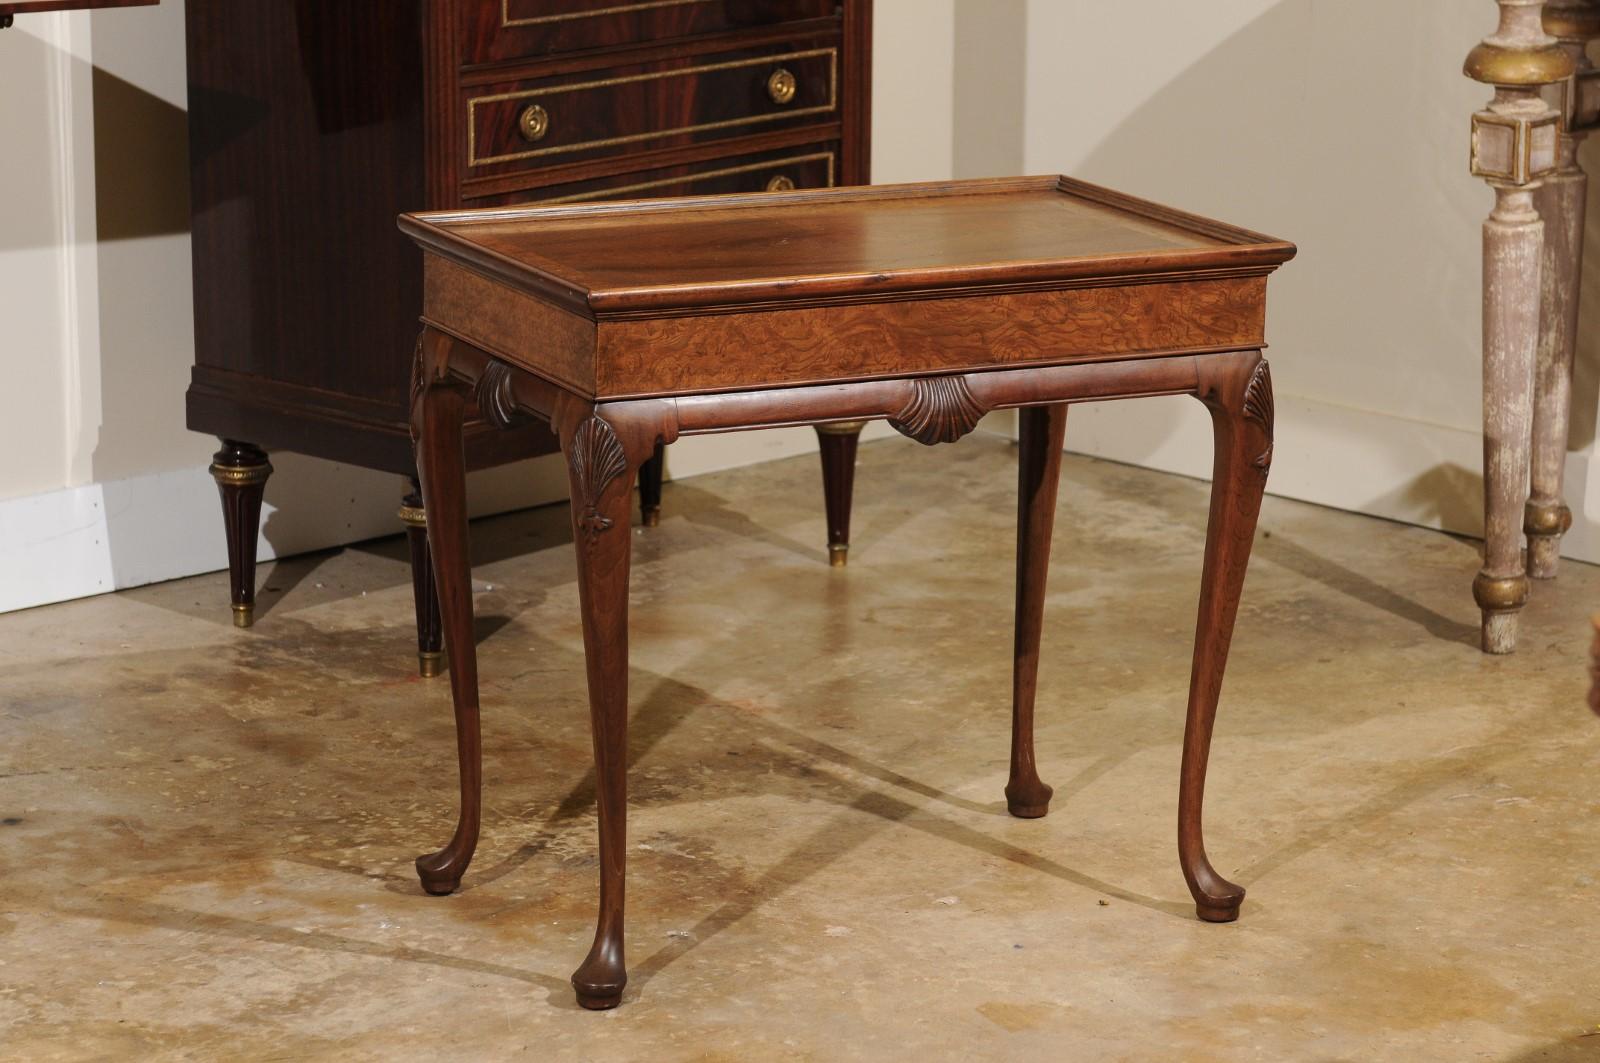 A beautiful Queen Anne style walnut and burl walnut table. It would work well as a side table or a coffee table. It is supported by four Queen Anne legs with padded feet. Each having a carved shell motiff.
The shell is also on all four sides of the